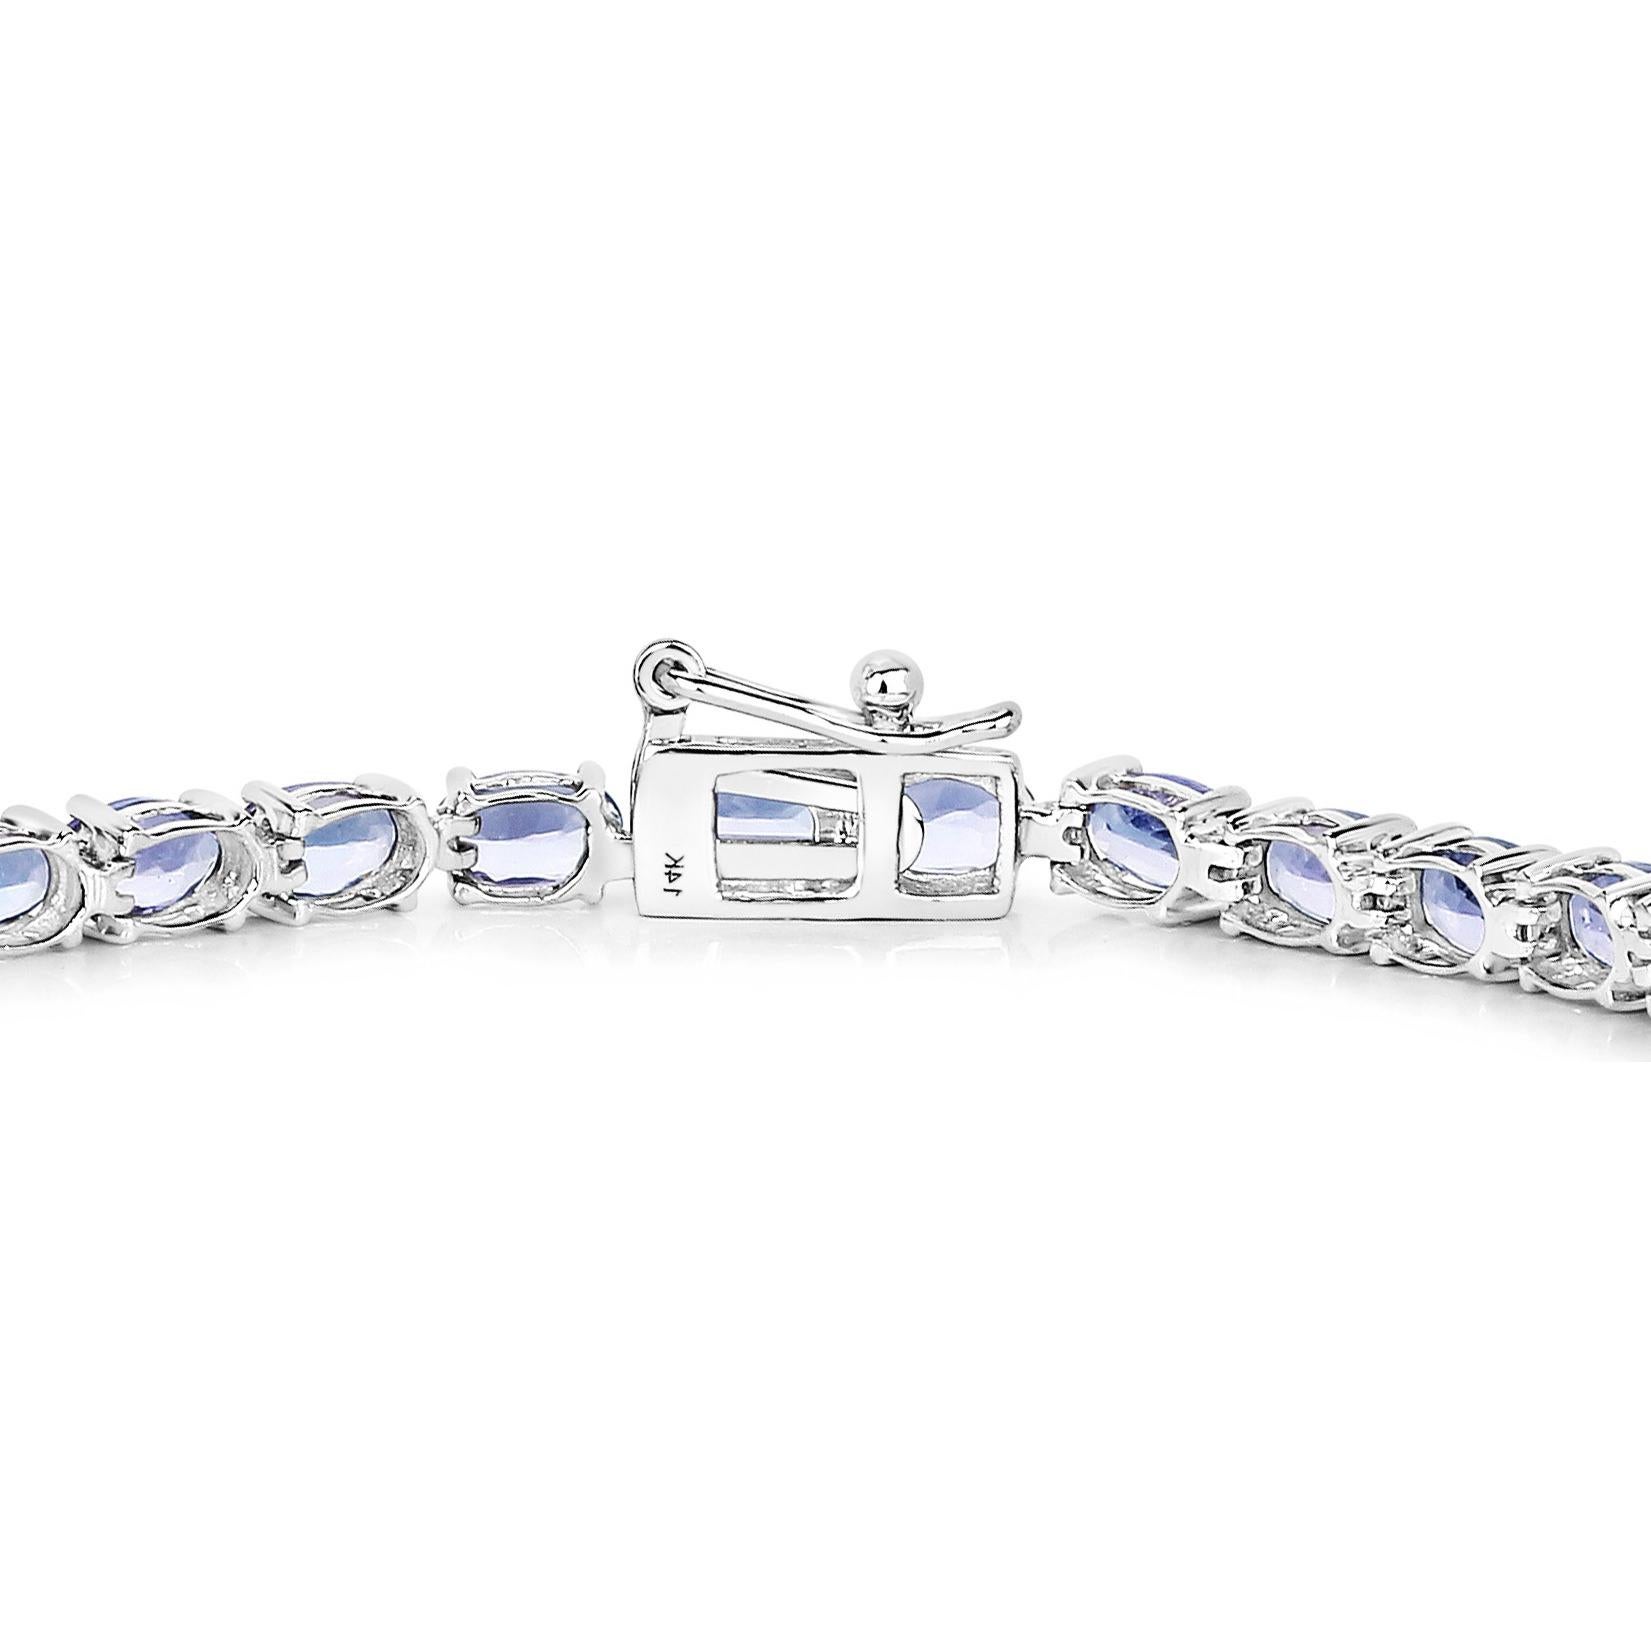 Tanzanite Tennis Bracelet Oval Cut 7.2 Carats 14K White Gold In Excellent Condition For Sale In Laguna Niguel, CA